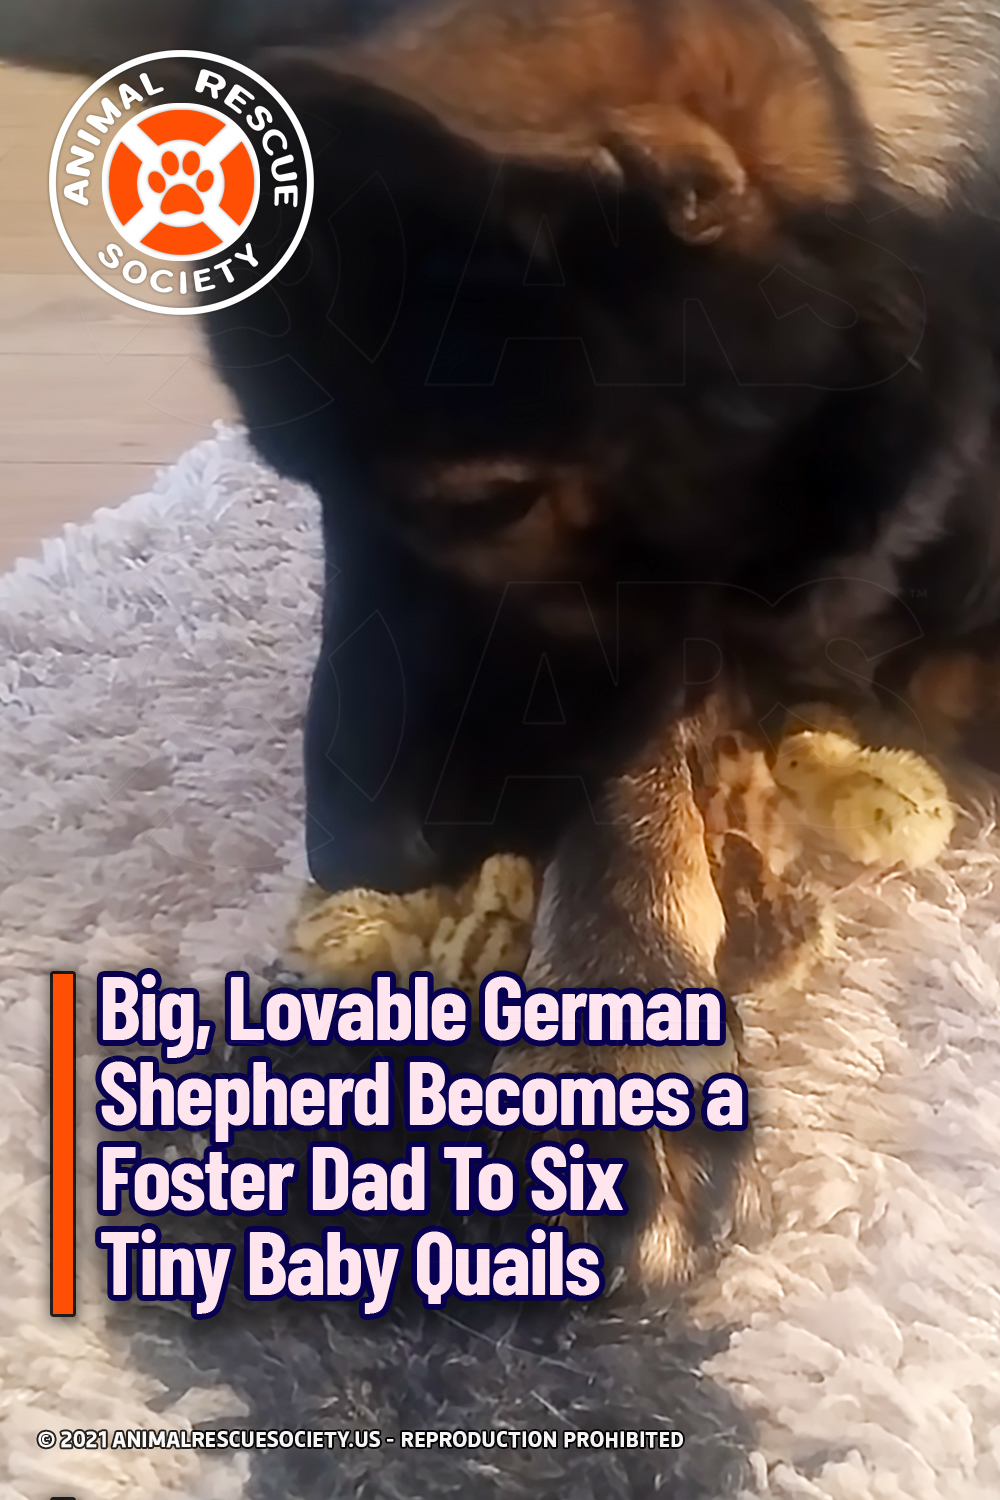 Big, Lovable German Shepherd Becomes a Foster Dad To Six Tiny Baby Quails